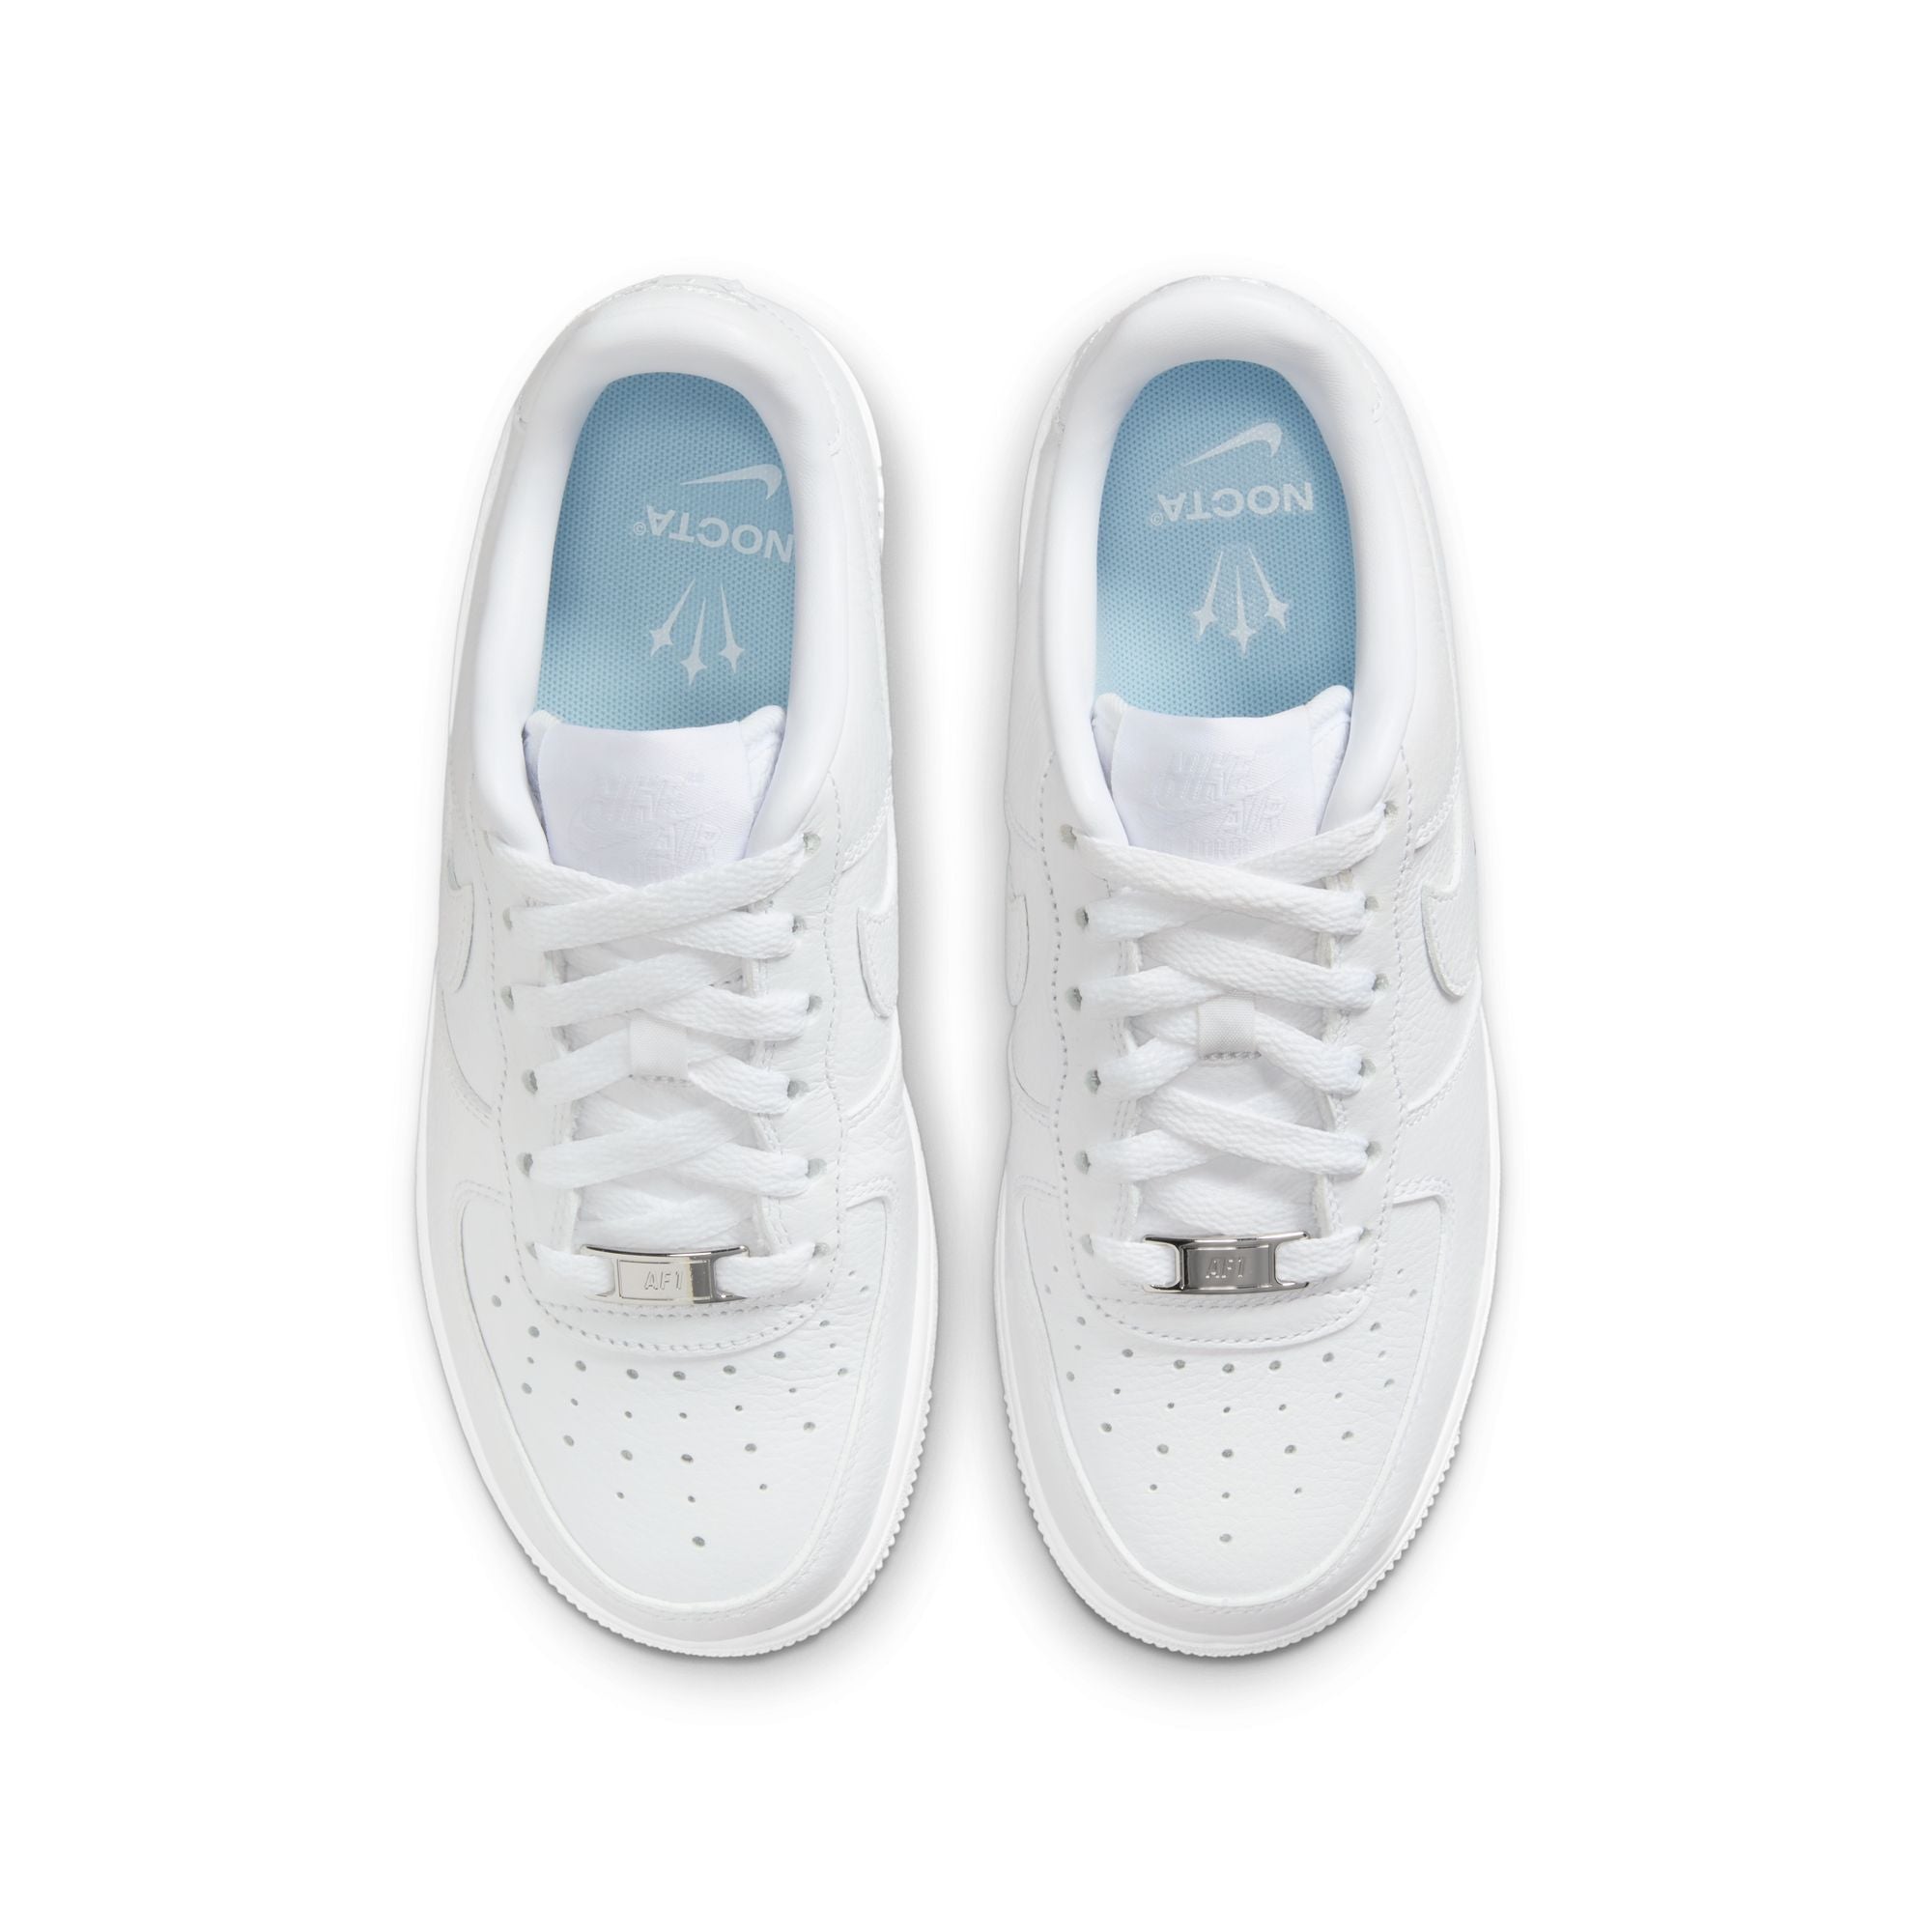 Nocta Nike Air Force 1 Low CLB (GS)